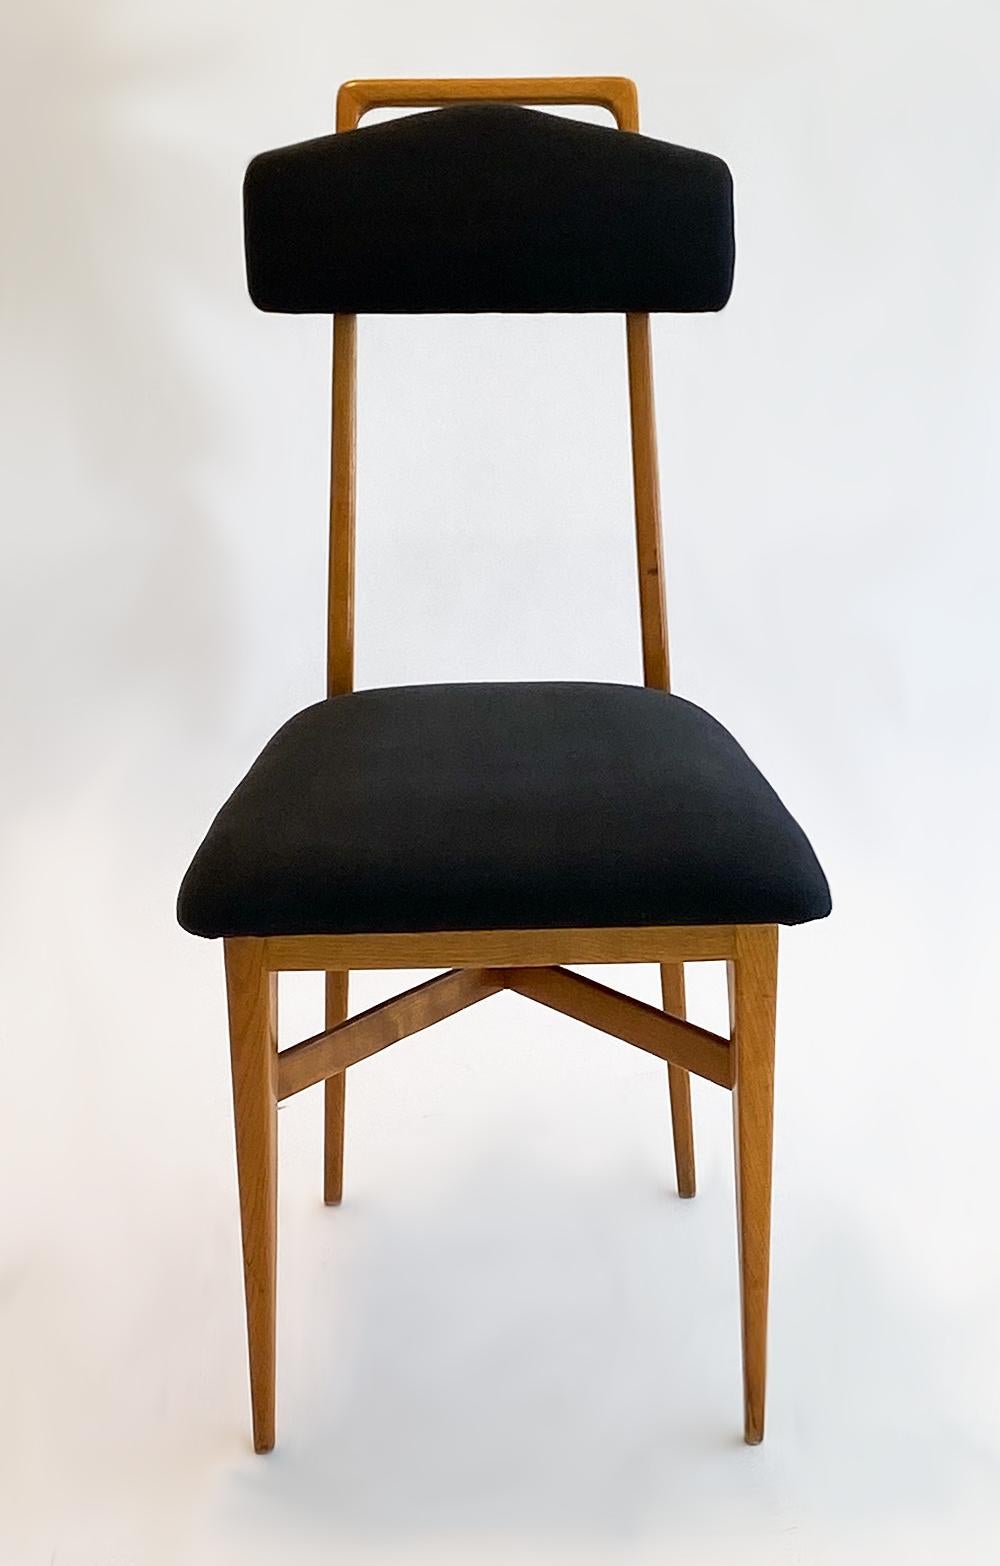 Set of six Ponti style dining chairs Italian Mid-Century Modern. Possibly Singer and Sons, Melchirre Bega, Cassina or Galleria Mobili Cantu. Delicate, diminutive sculpted wood frames with X-stretchers, upholstered seats and floating headrests. 1950s